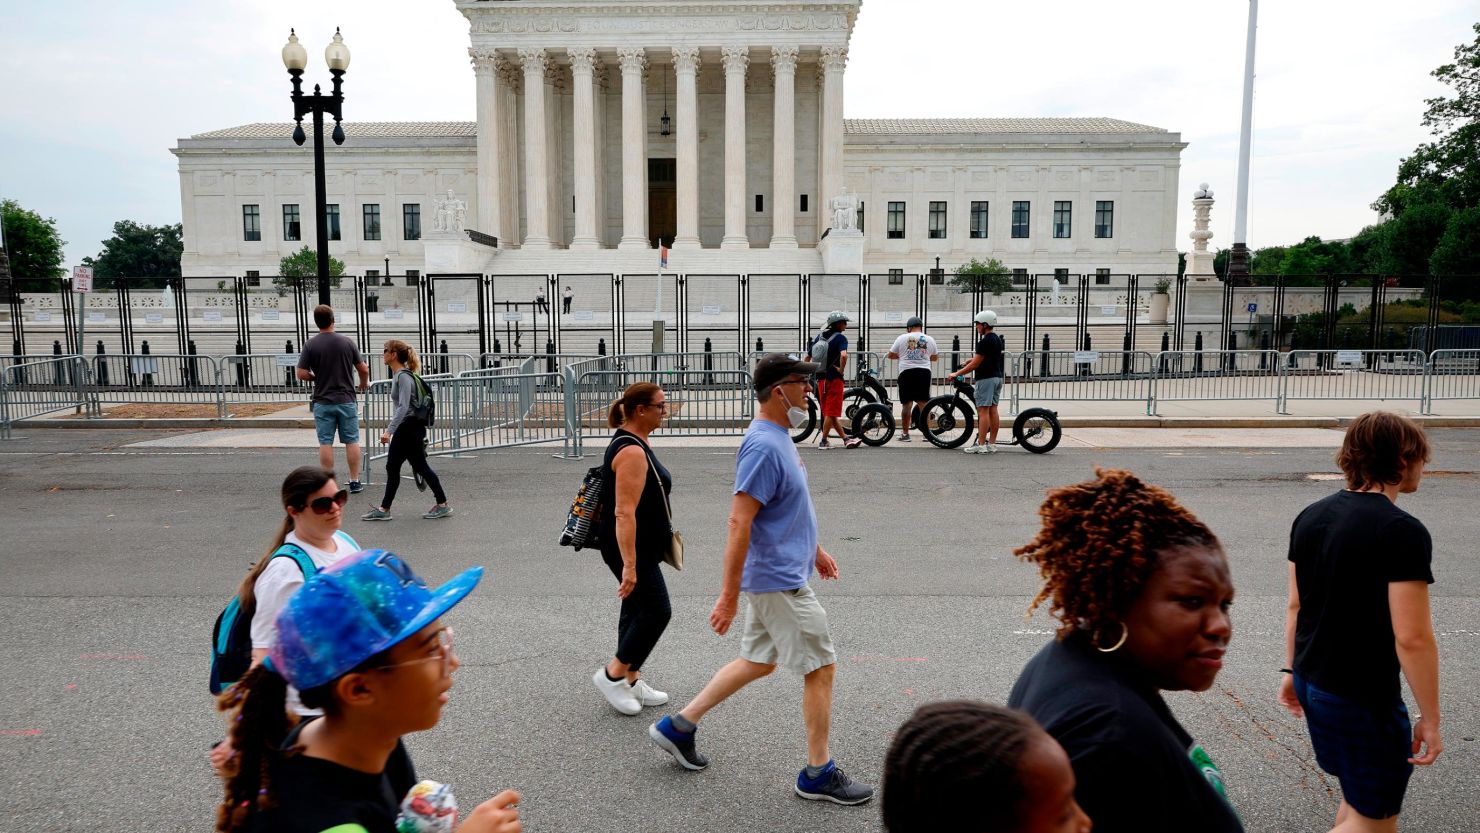 The U.S. Supreme Court building surrounded by a temporary security fence on June 22, 2022 in Washington, DC. 